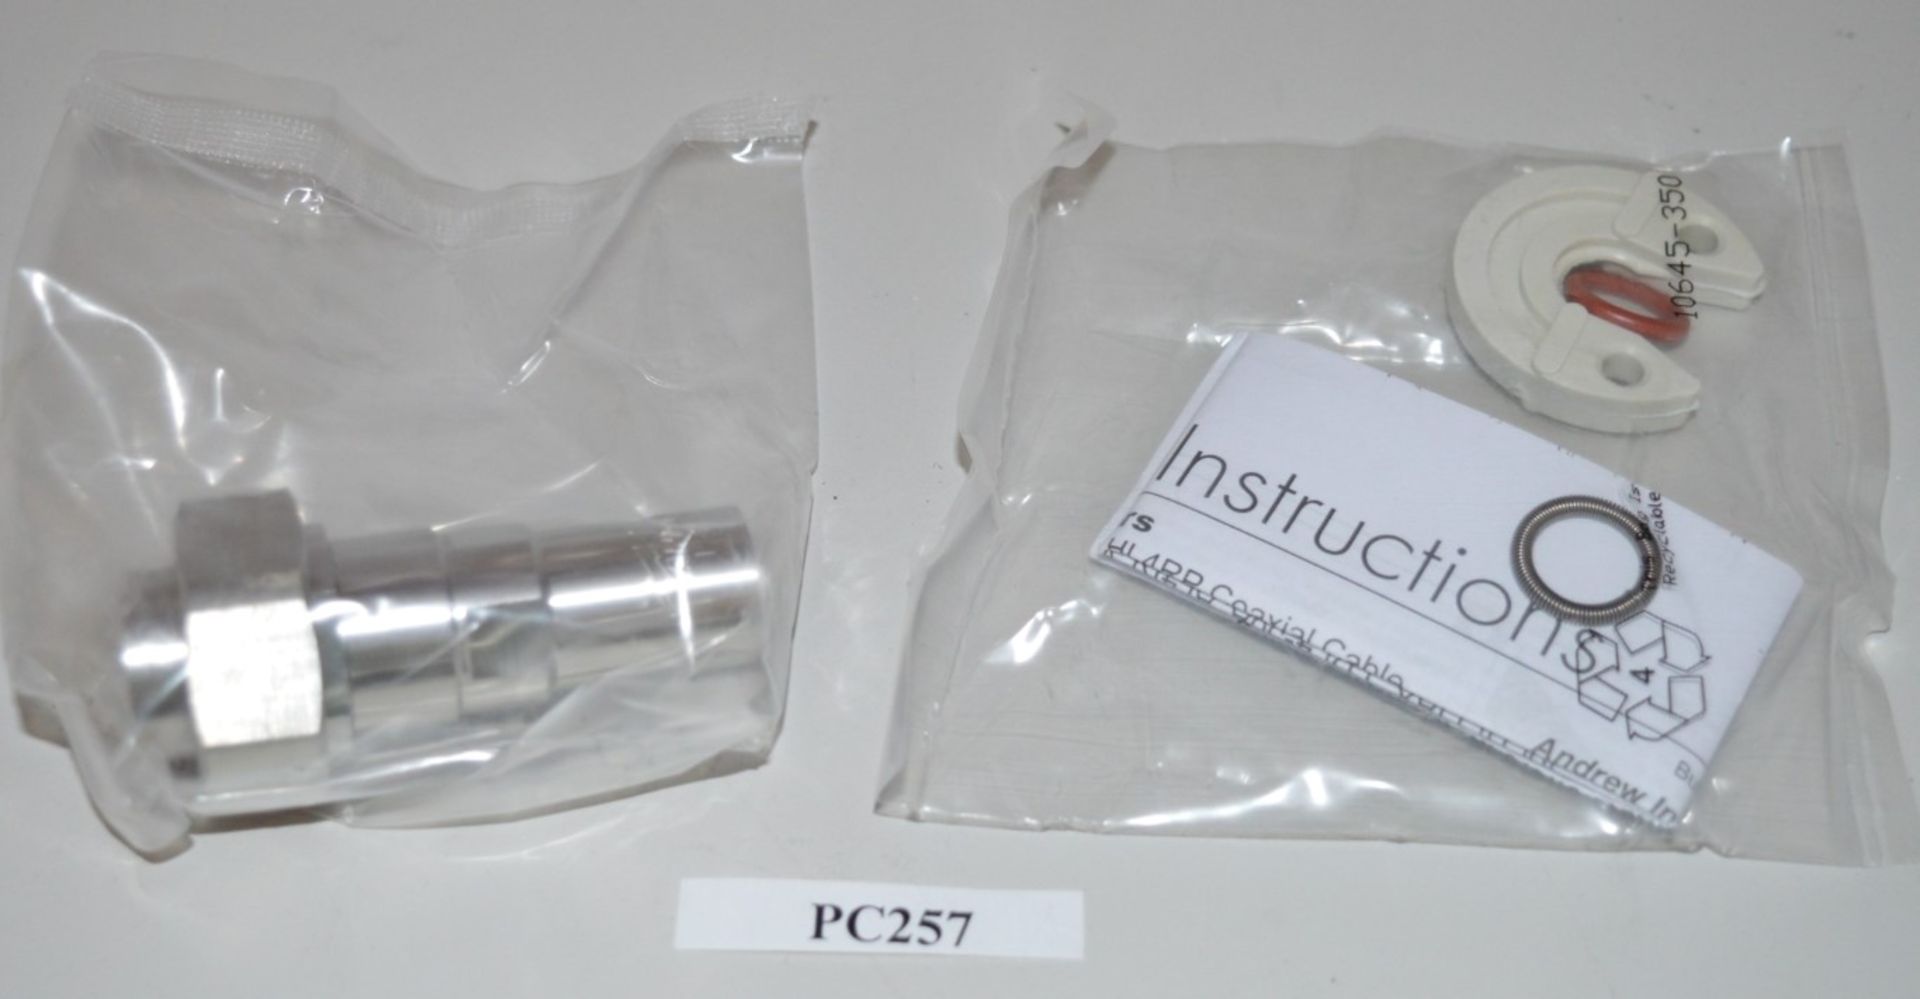 18 x Commscope L4TDM-PSA Din Male Positive Stop Connectors - Andrew Solutions - Brand New Boxed - Image 6 of 8